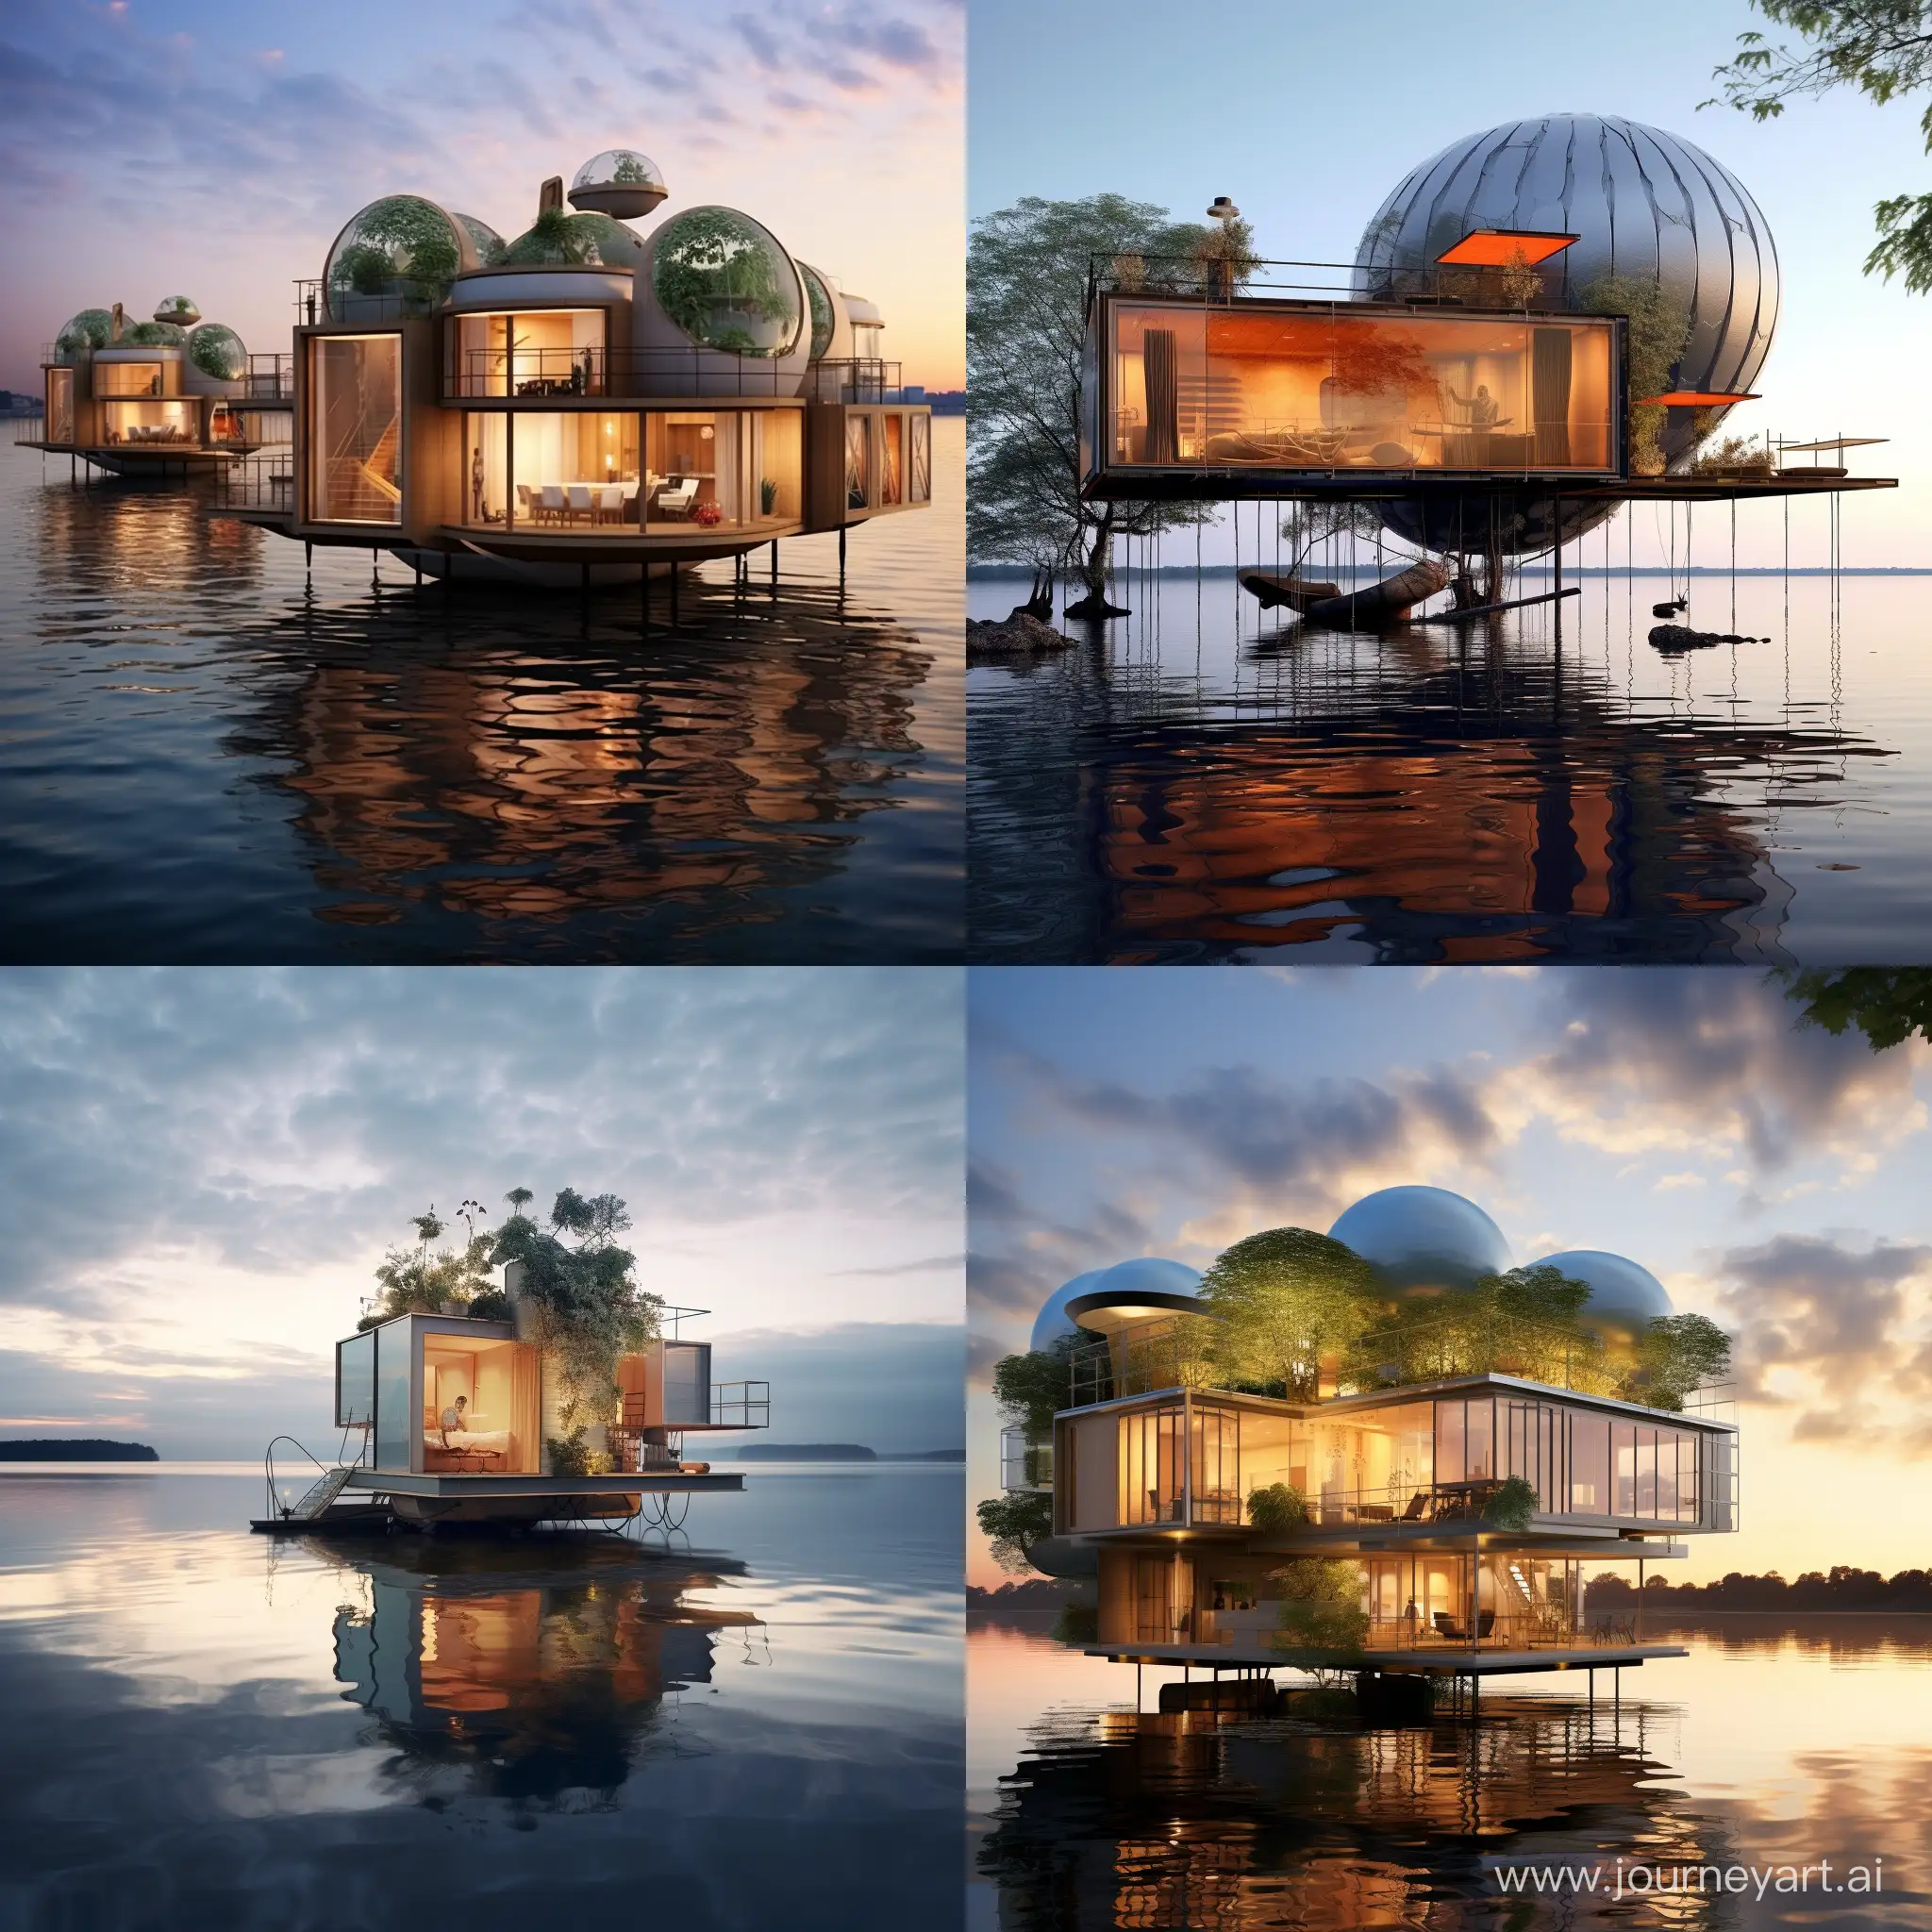 
Floating Architecture:
Explore architectural projects that defy gravity, such as floating homes, buildings, or structures that interact with water bodies in innovative ways.